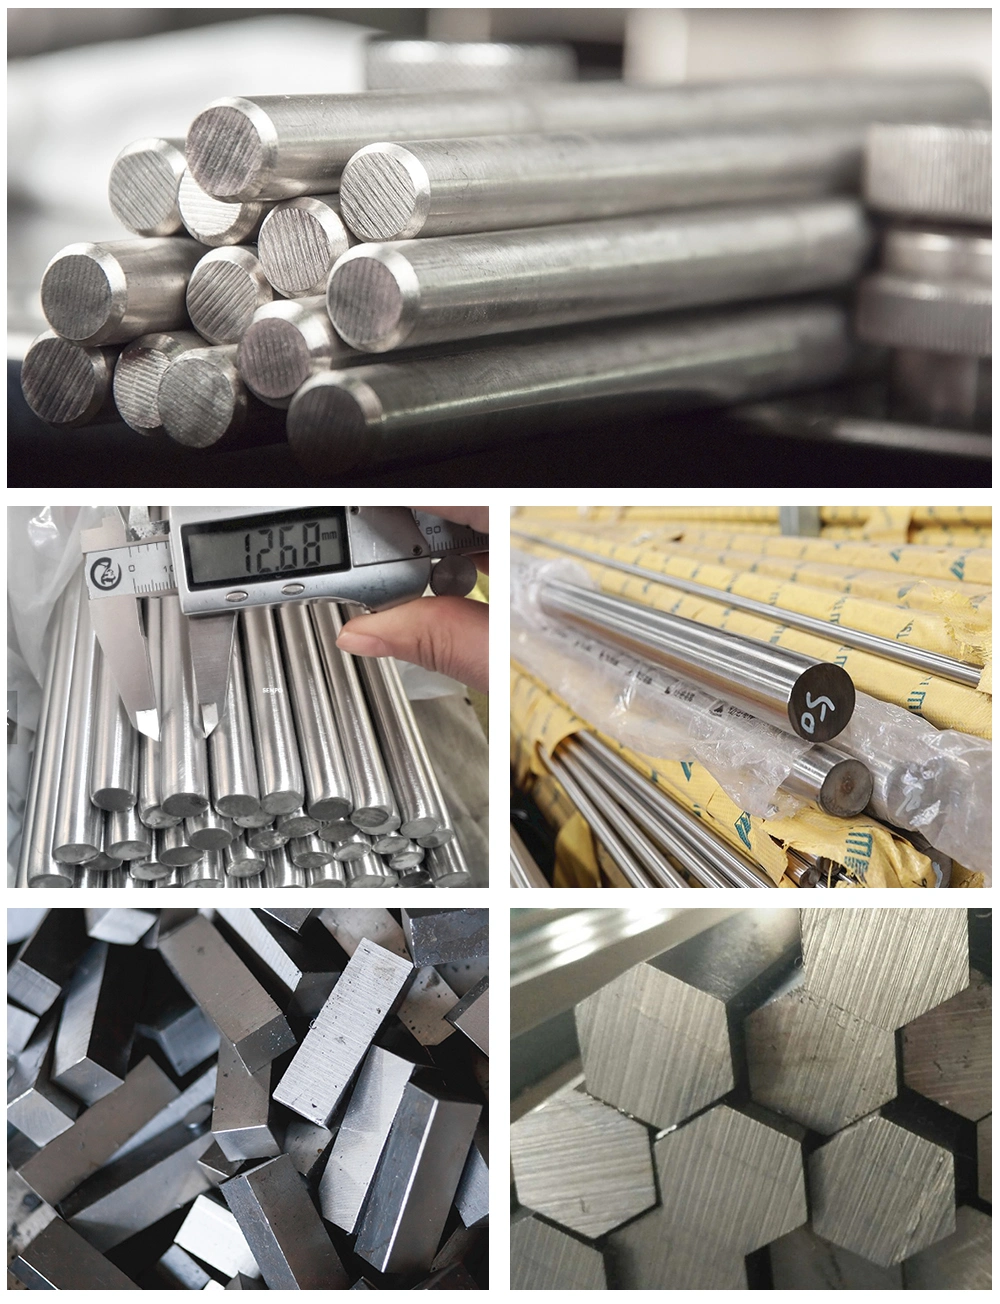 Monel 400 K-500 No4400 W. Nr. 2.4360 Forged Rods Ingots Forgings Nickel Copper Alloy Bar